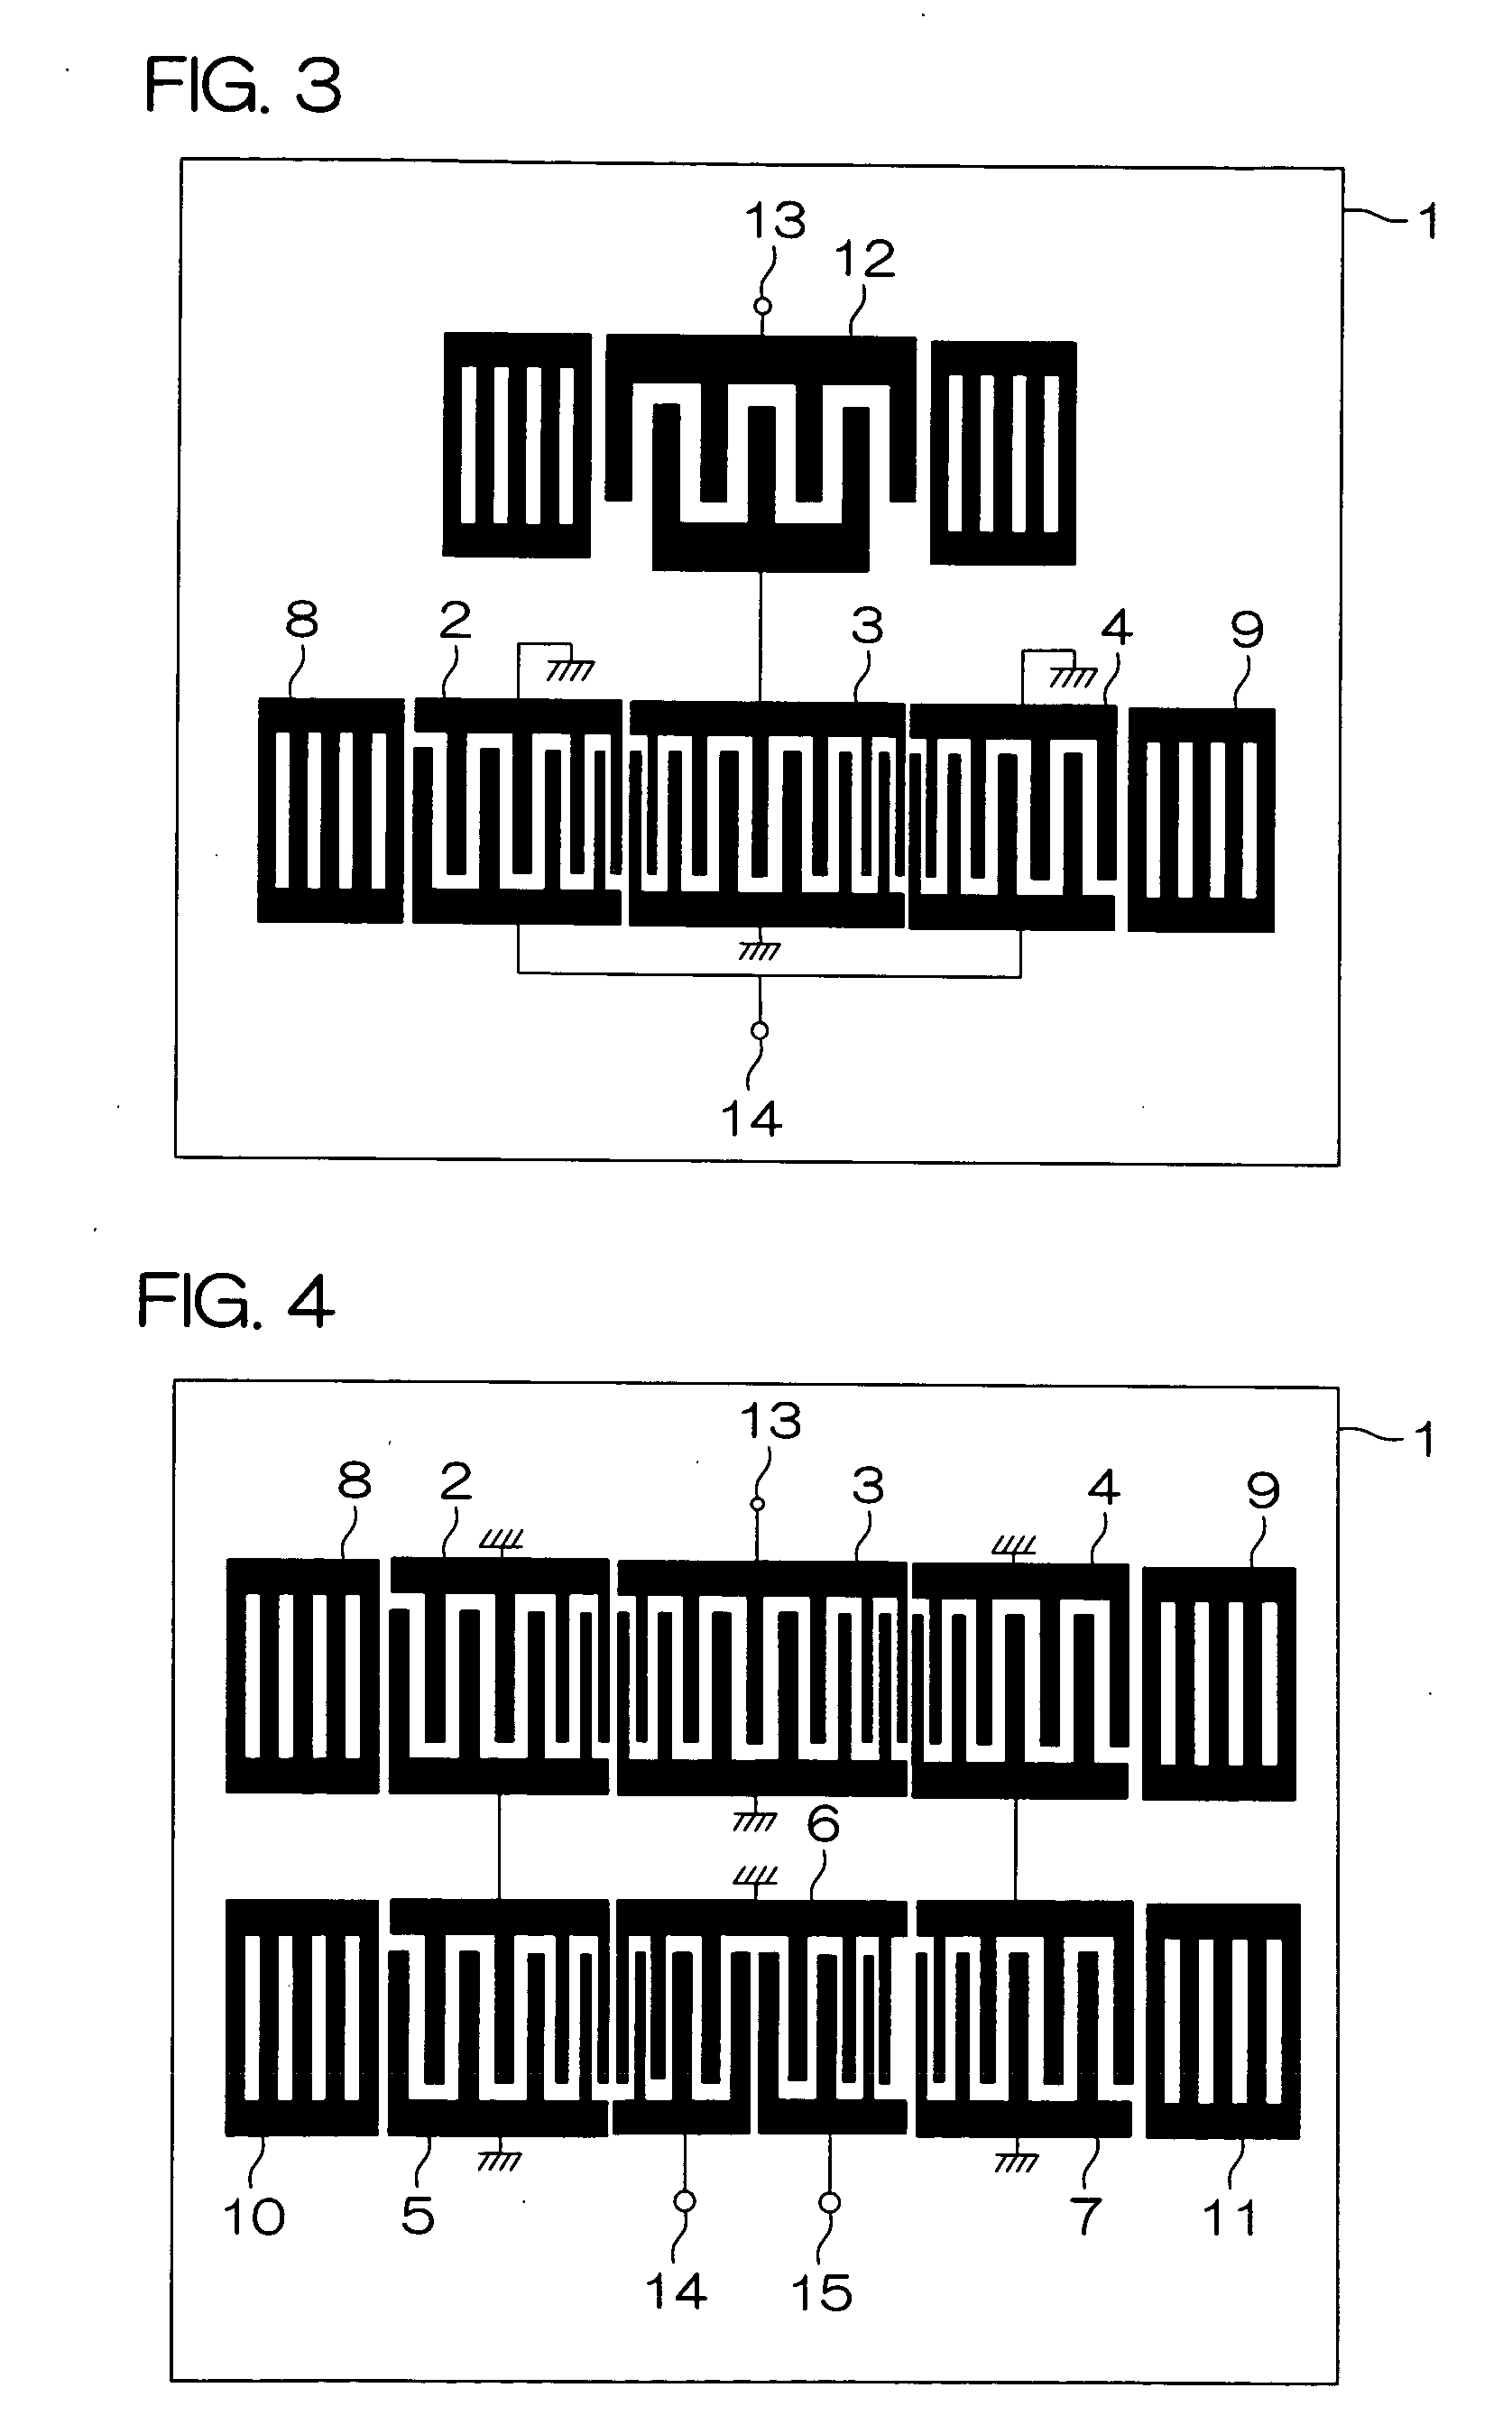 Surface acoustic wave resonator, surface acoustic wave device, and communications equipment